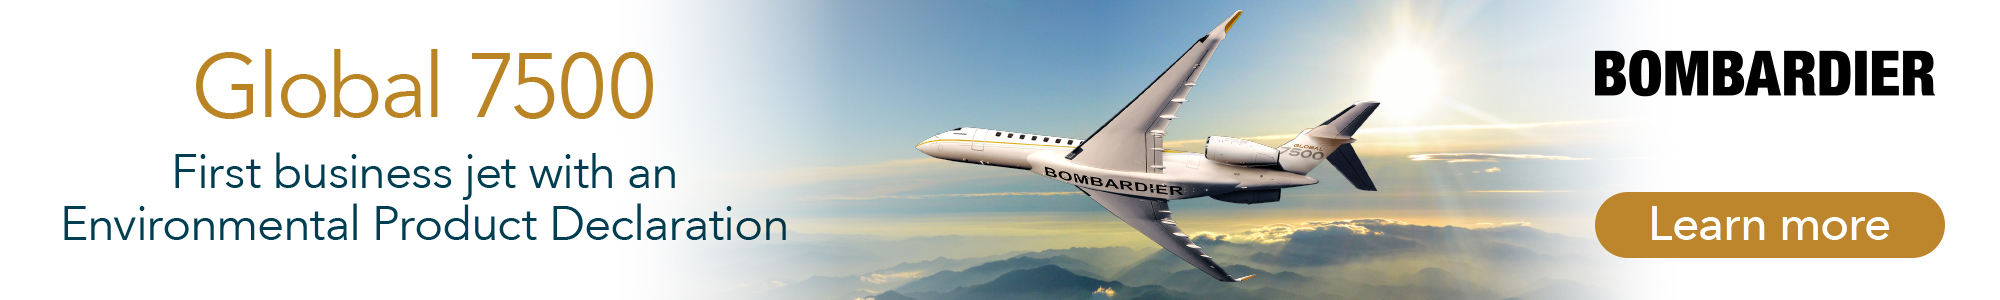 bombardier advertising view information